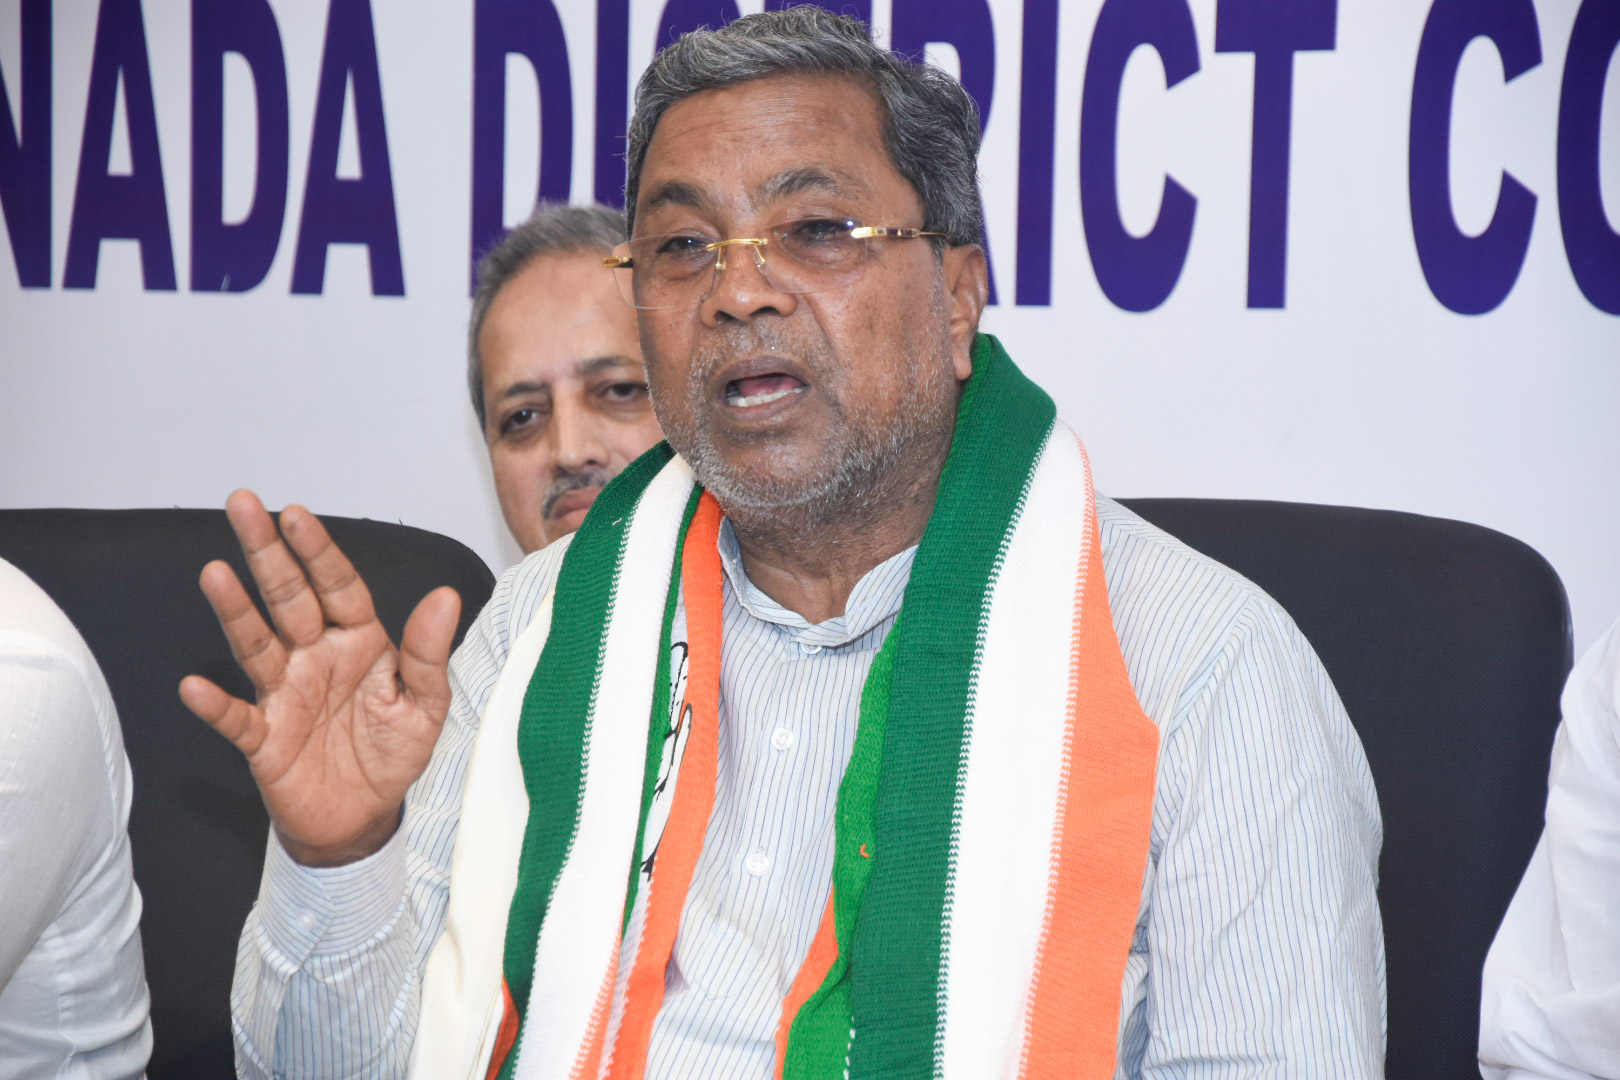 Siddaramaiah alleges underreporting of COVID deaths; govt rejects charge